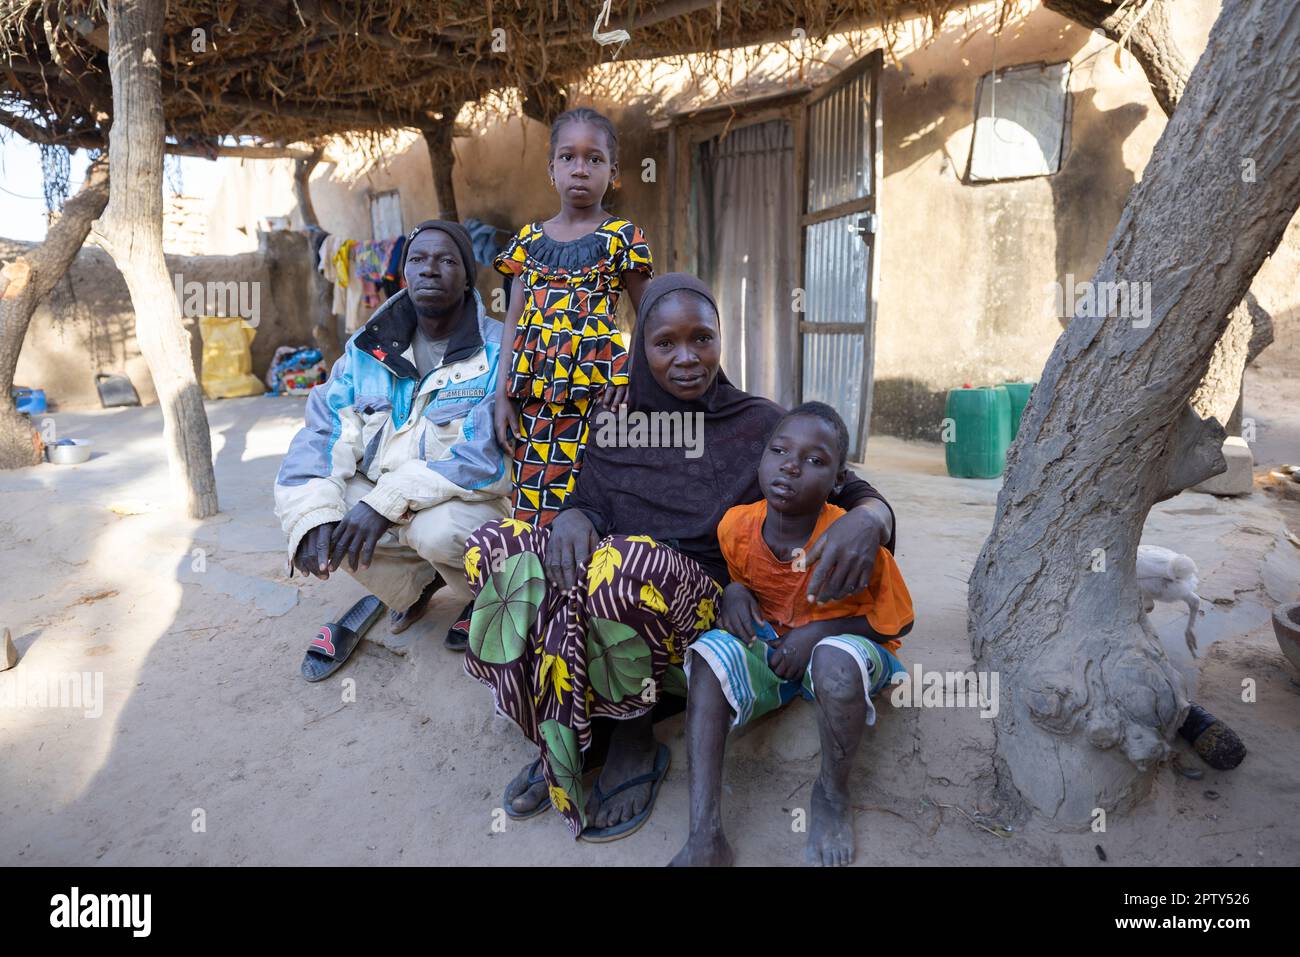 Large family sitting together in front of their home in Segou Region, Mali, West Africa. 2022 Mali drought and hunger crisis. Stock Photo